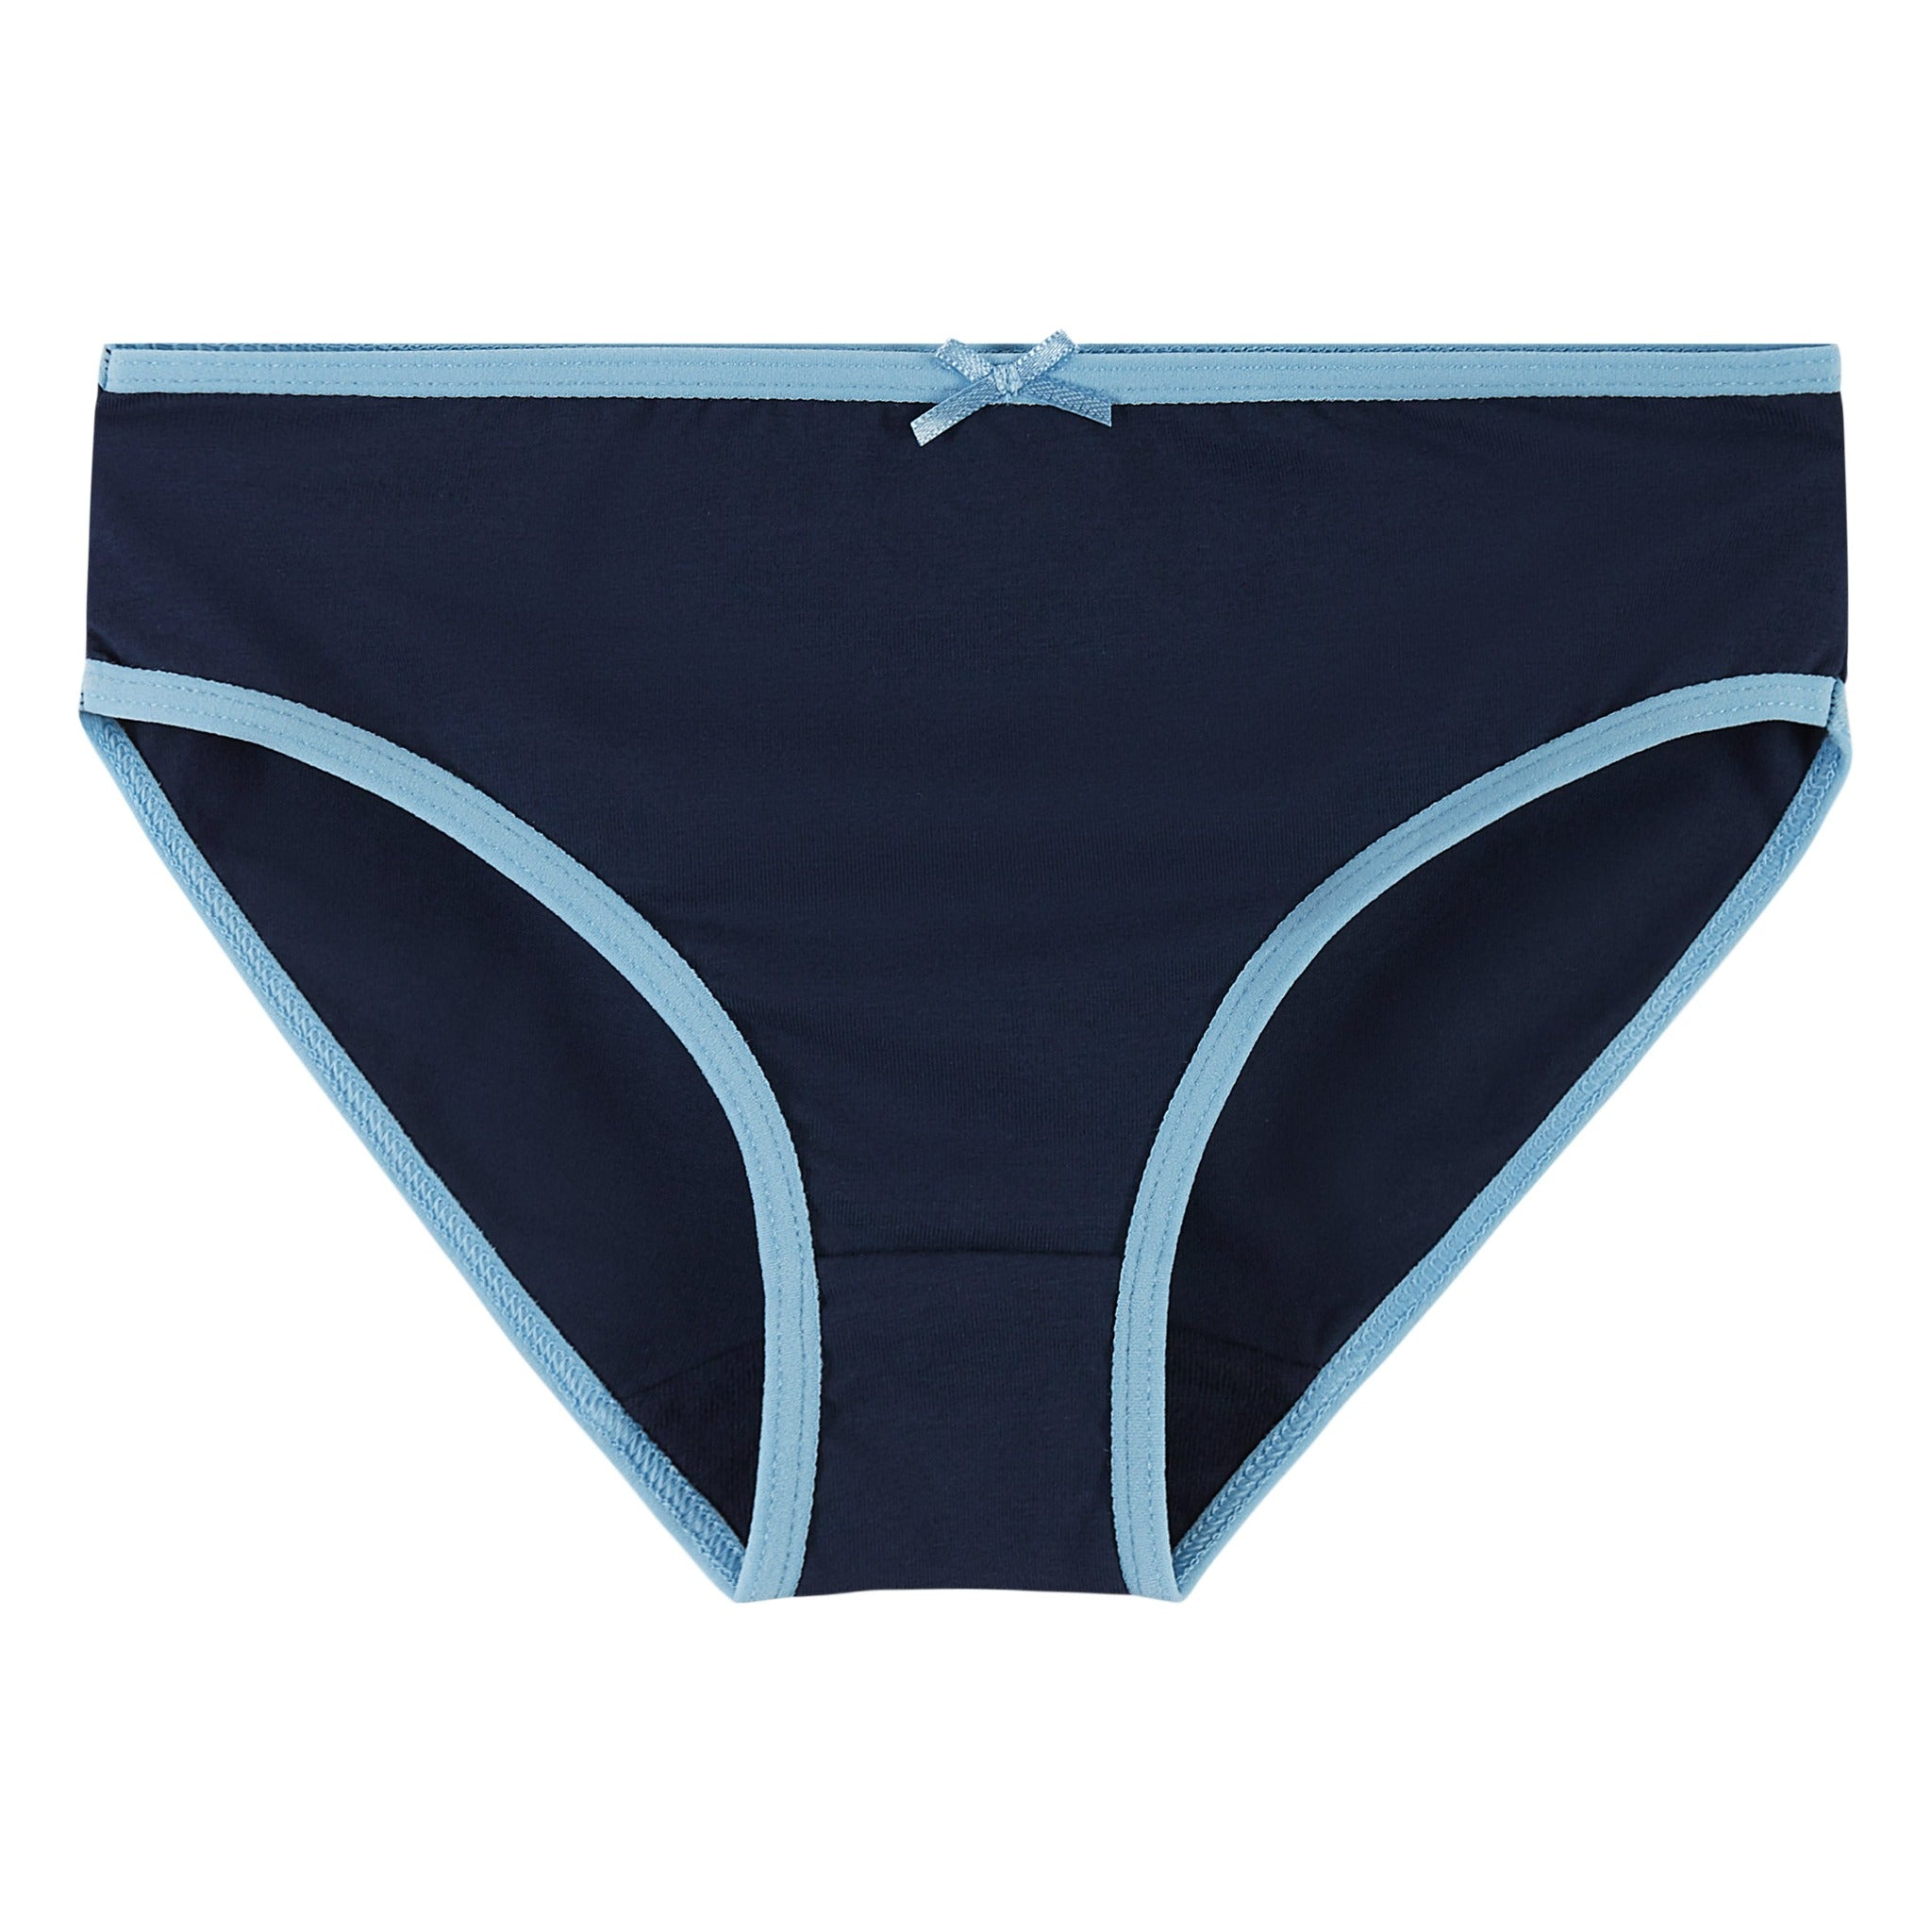 Girls underwear en swimwear for outletprizes at Dutch Designers Outlet.  Fast shipping.